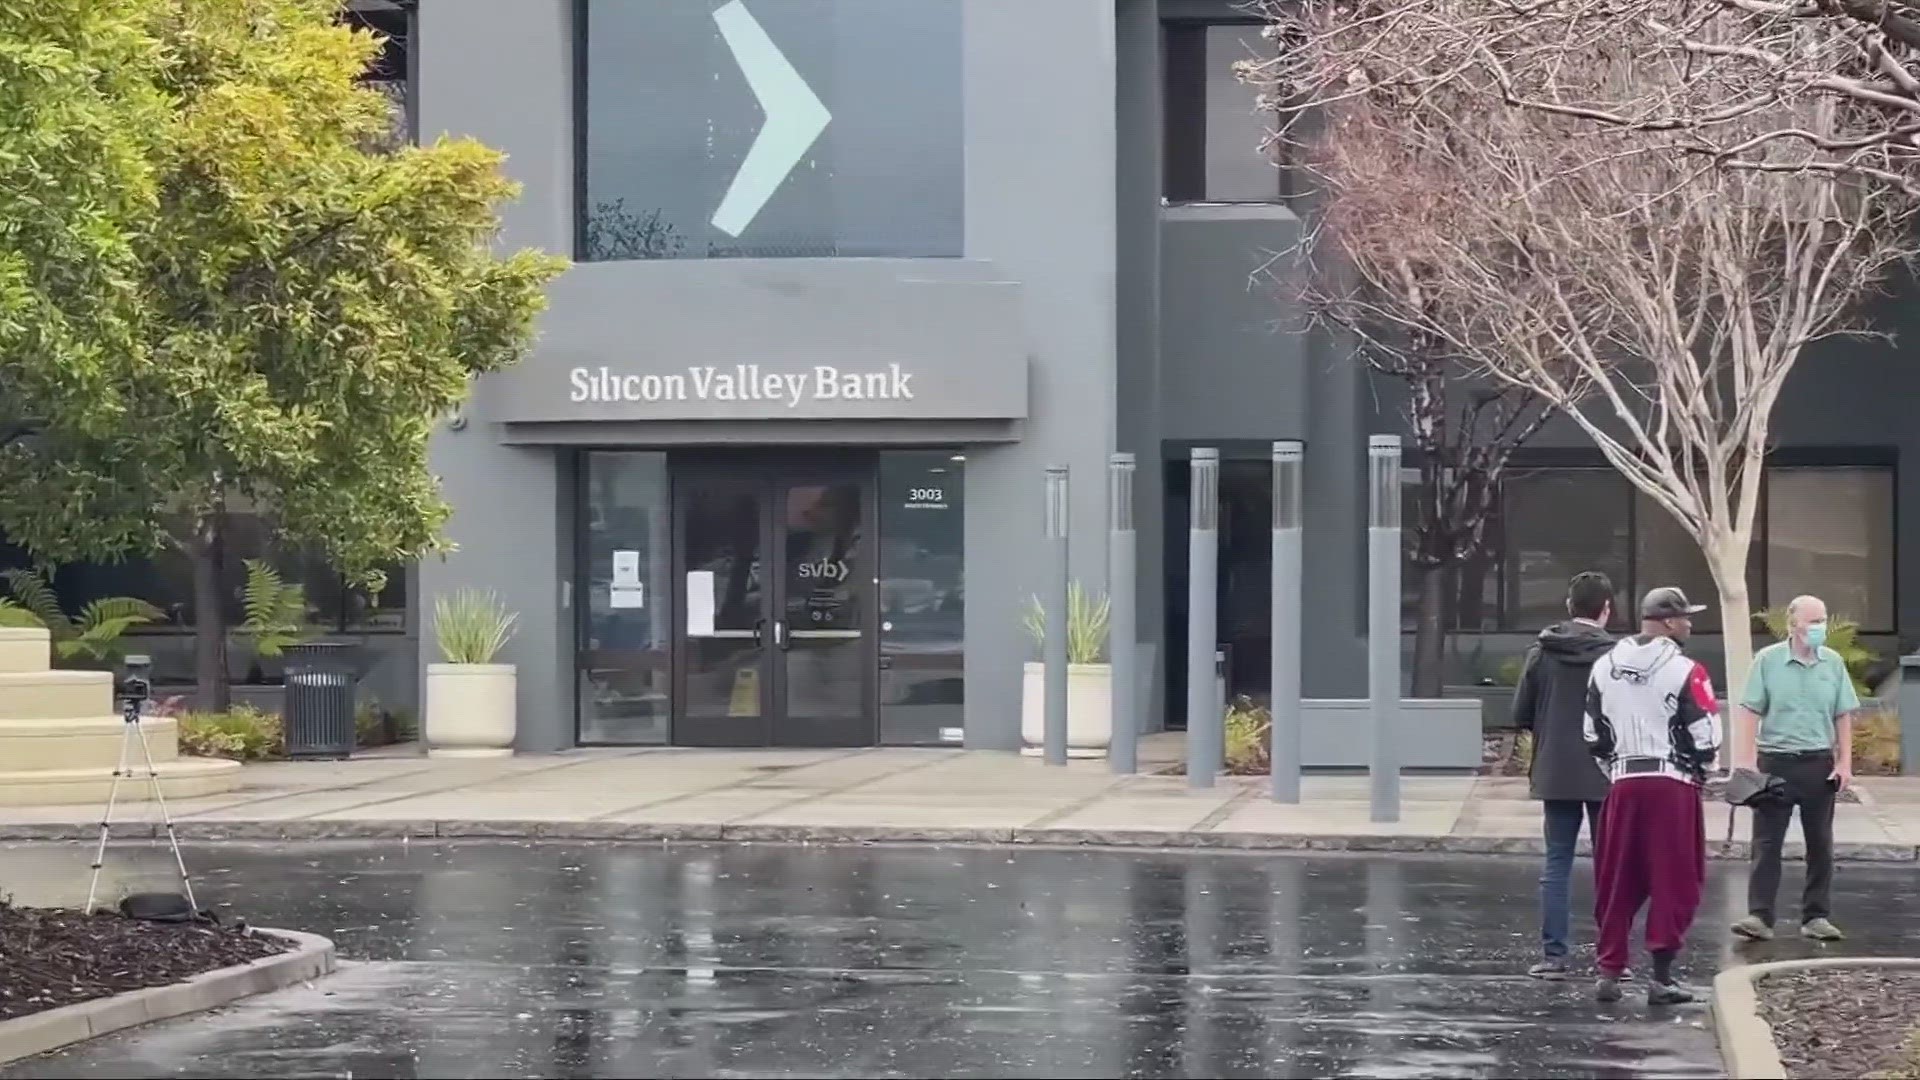 Fallout from the second largest bank failure in U.S. history. Regulators announcing a plan to ease fears over the failed Silicon Valley Bank in California.